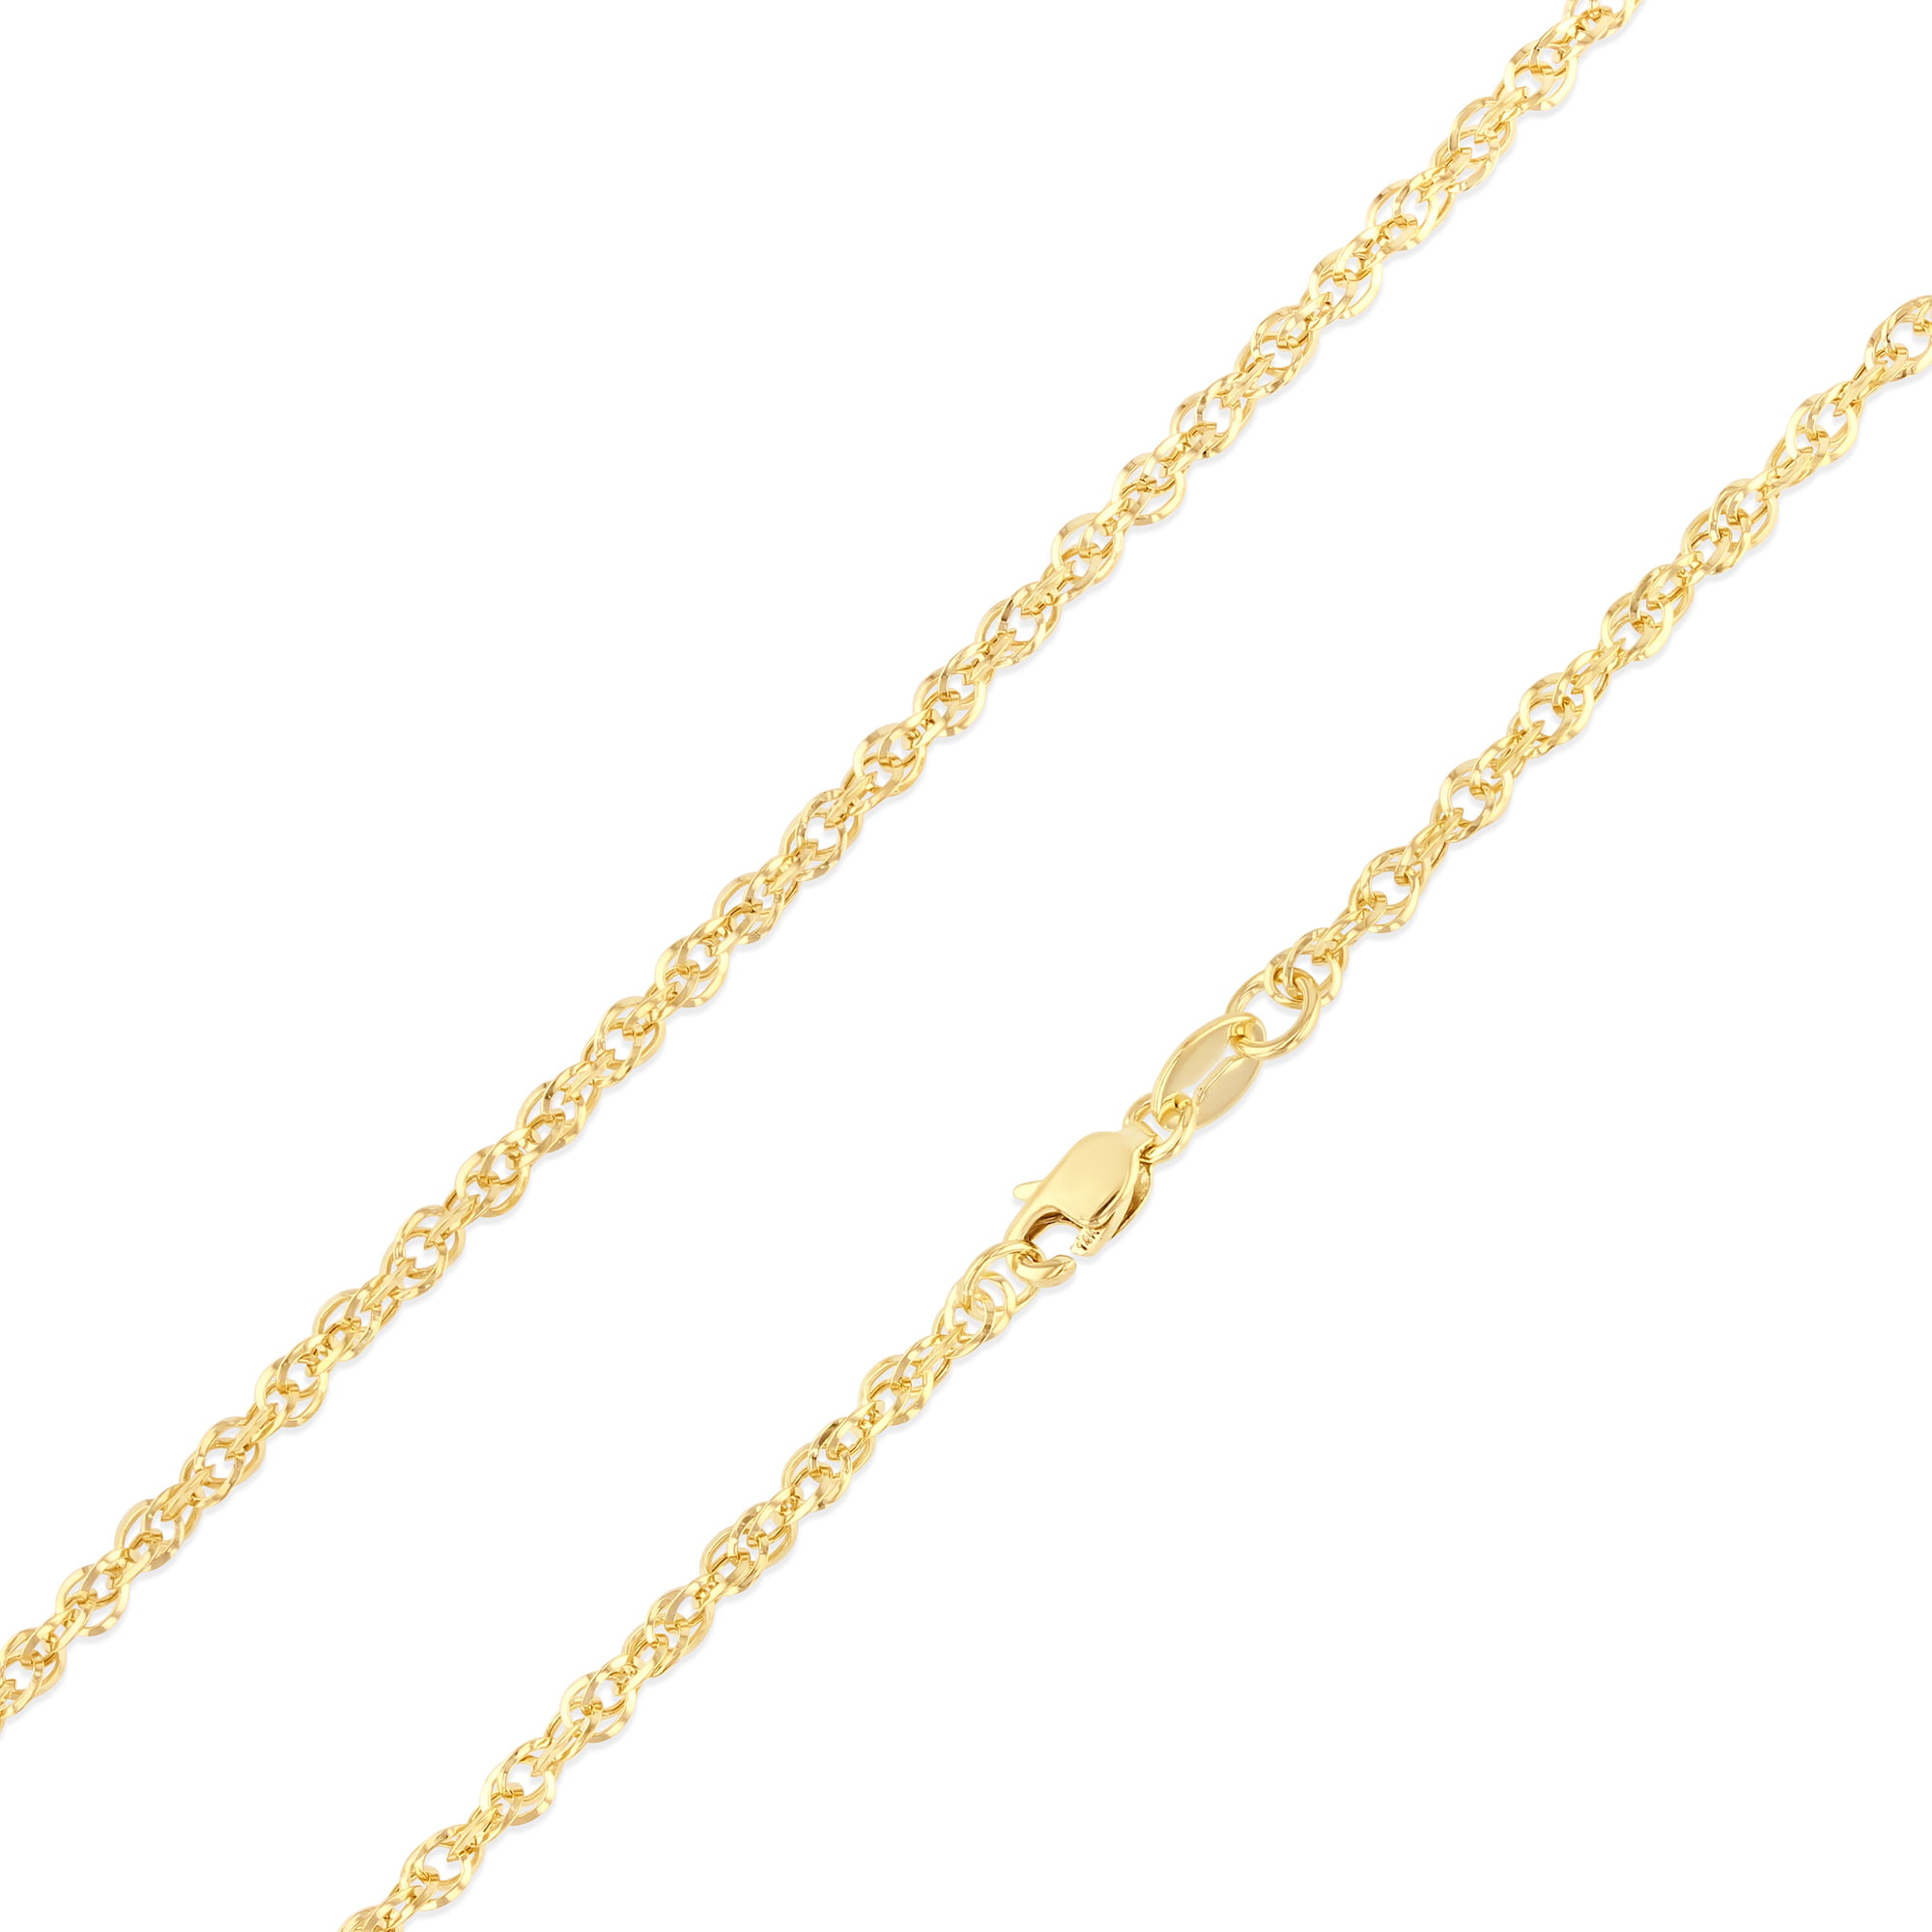 Jewels By Lux 14K Yellow Gold Double Link Hollow Rope Chain Necklace With Lobster Claw Clasp